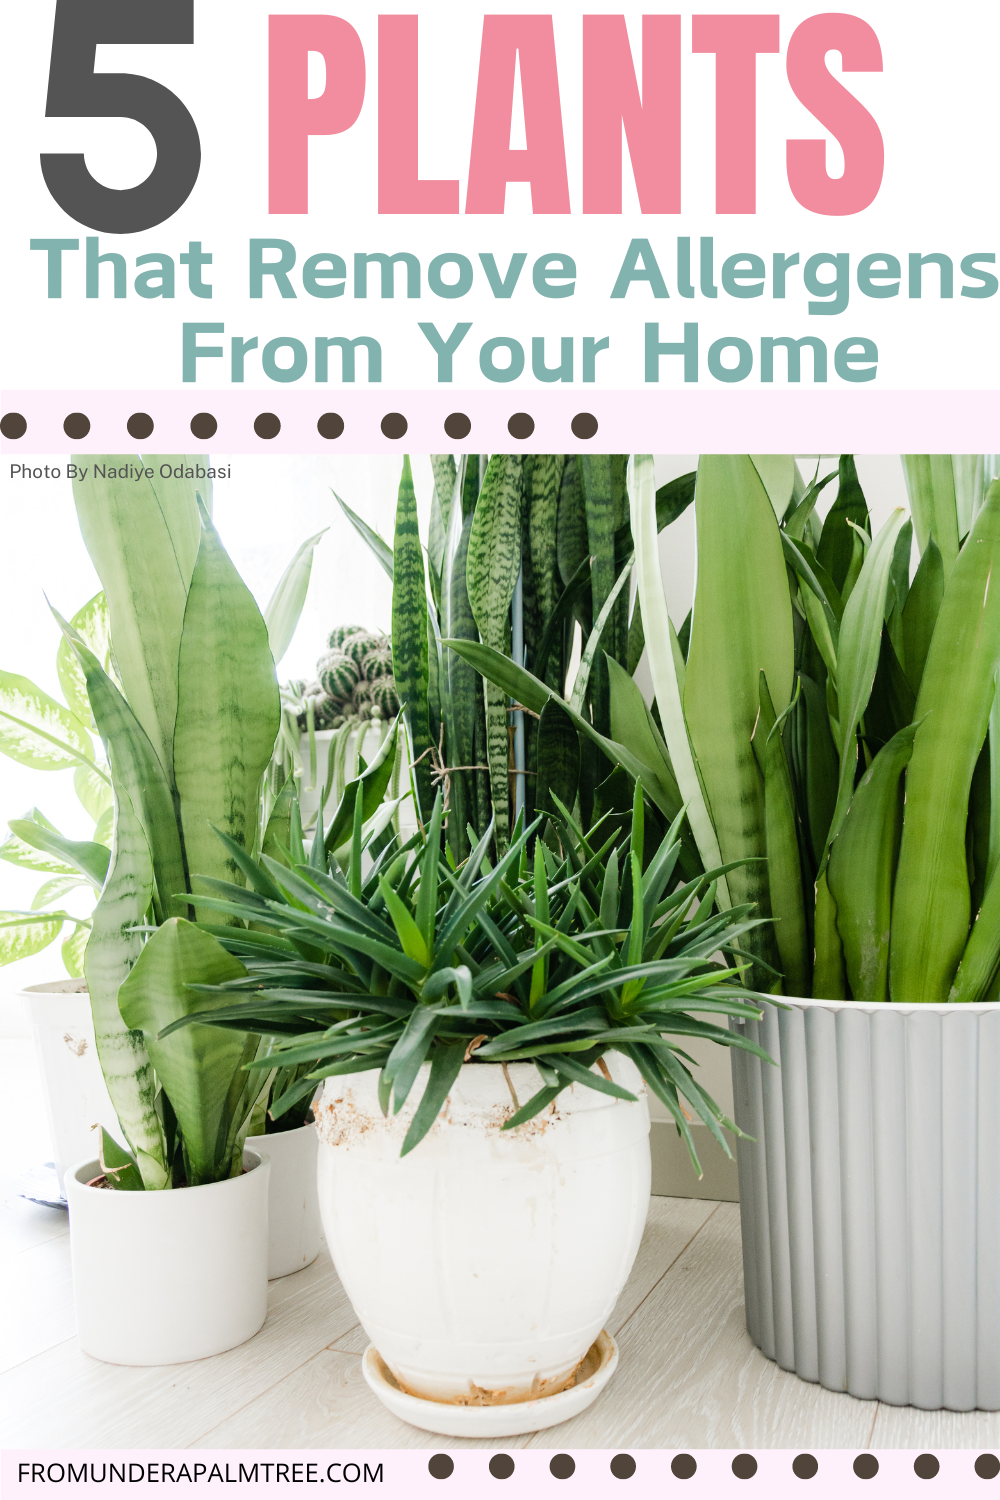 best plants for allergies and asthma | outdoor plants that remove allergens | indoor plants that remove allergens | best indoor plants for allergies and asthma | plants tha help with dust allergies | worst indoor plants for allergies | indoor plants allergy symptoms | best outdoor plants for allergy sufferers | plants that removes mold | plants that remove negative energy | plants that remove negative energy | plants that remove moisture | plants that remove readiation | plants that remove odor | plants that remove black mold | remove flies from plants | how to remove pests from plants | eczema friendly house plants | plants | planting tips | indoor plant tips | how to keep plants alive | how to not kill plants | plant hacks | gardening tips | gardening hacks | spider plants | snake plants | peace lily | alow vera | aloe vera uses | golden pothos | how to use aloe in the home |